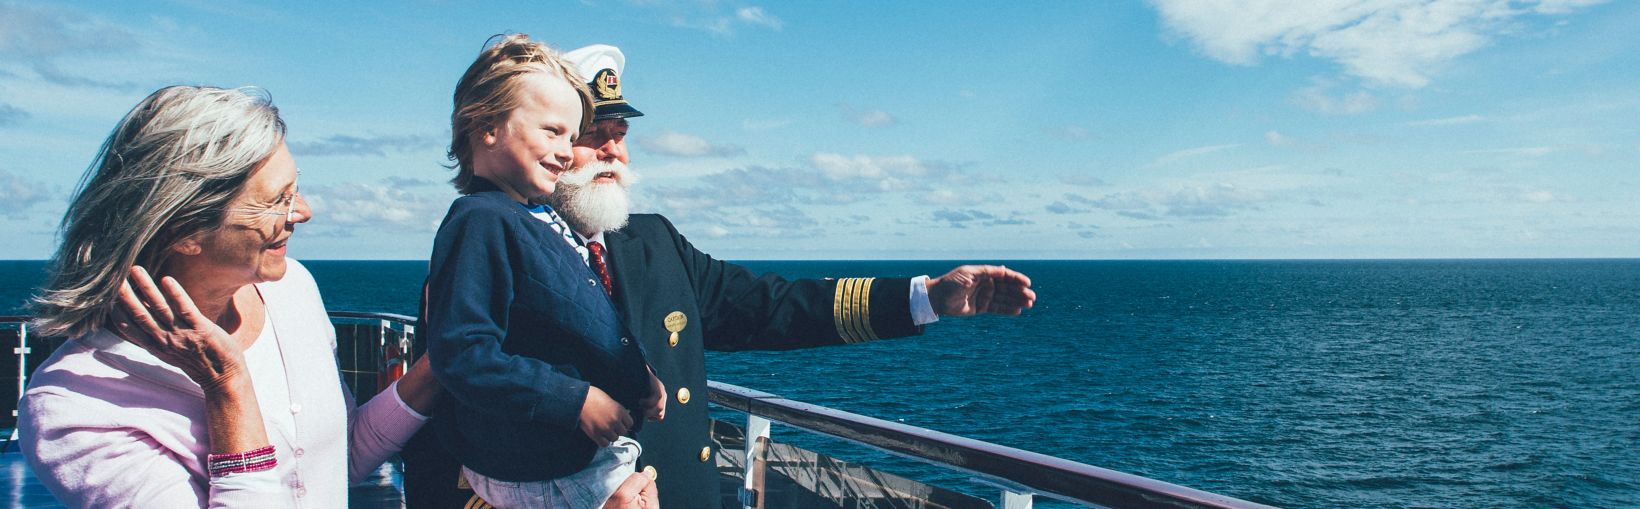 The captain of a Stena Line ferry on deck pointing out to sea and holding a young boy with his mother smiling nearby